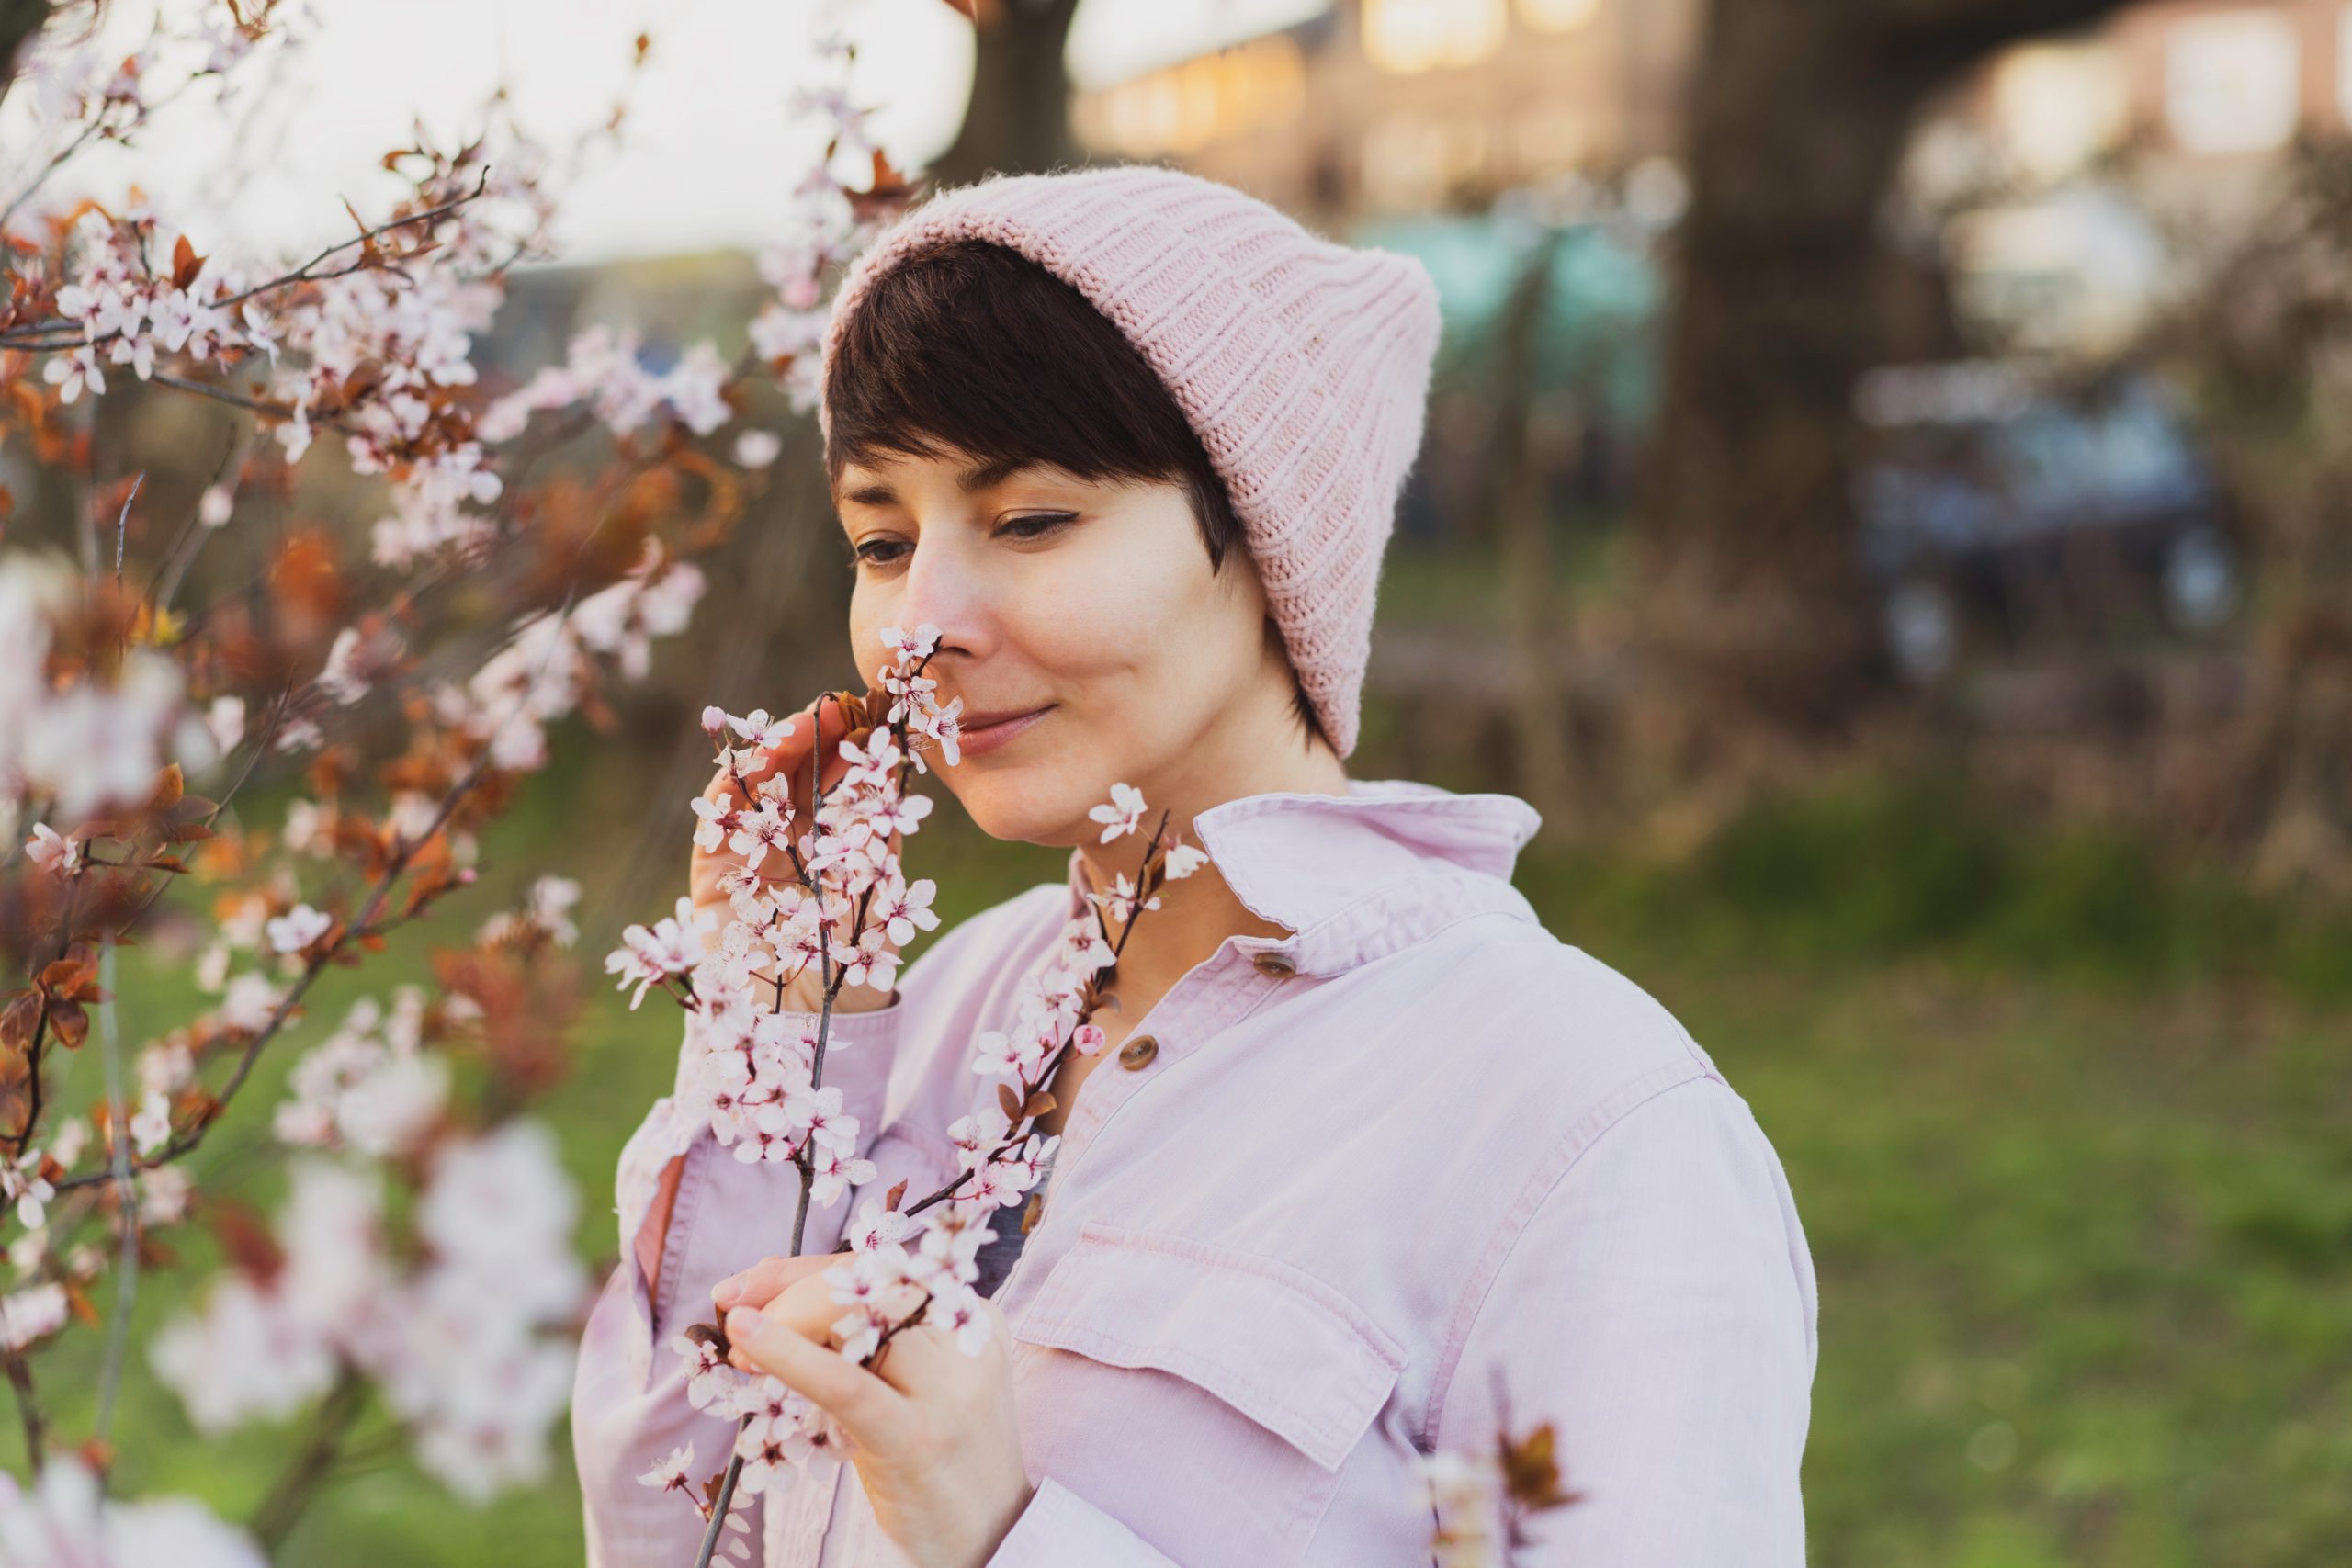 Woman in pink clothes sniffing blooming branches with pink flowers. Enjoying springtime